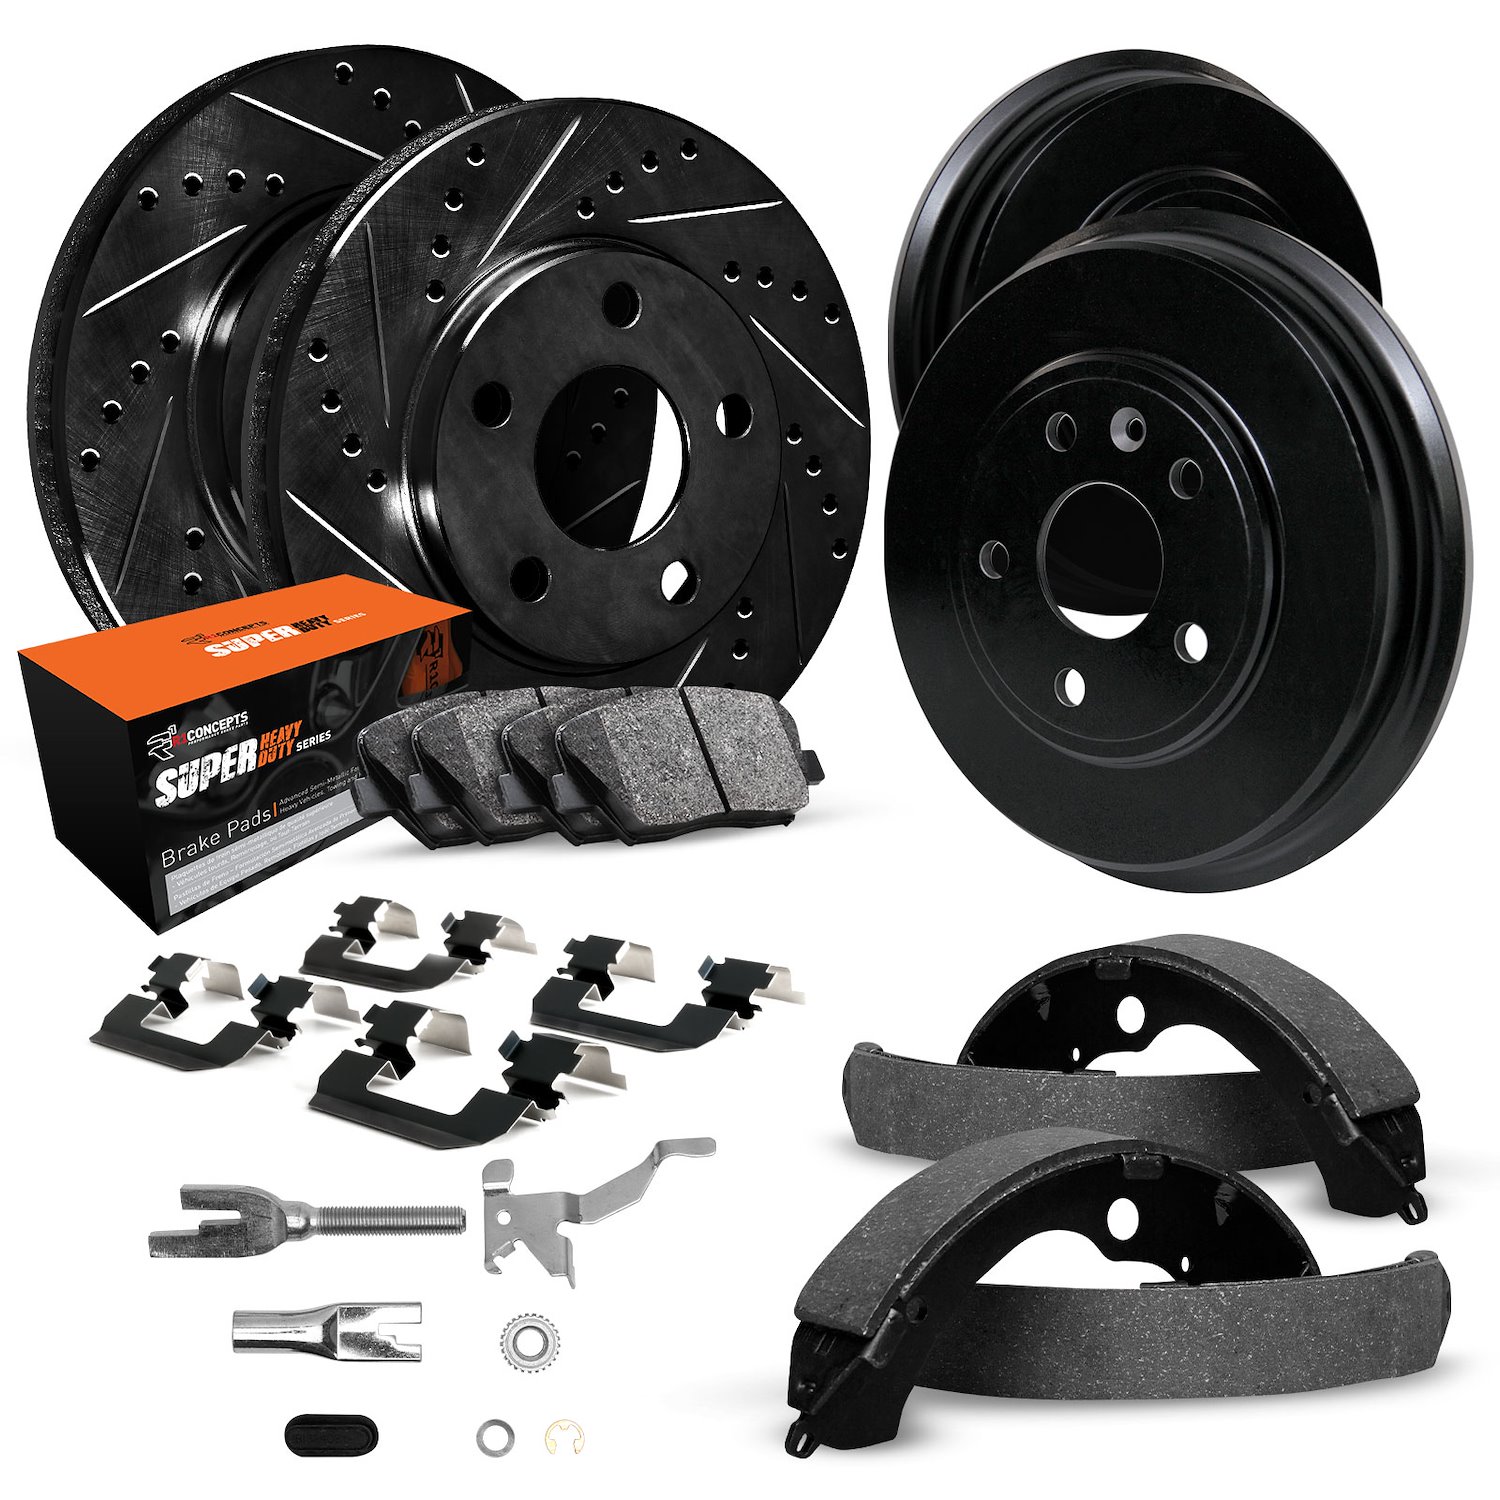 E-Line Slotted Black Brake Rotor & Drum Set w/Super-Duty Pads, Shoes, Hardware/Adjusters, 2000-2004 Ford/Lincoln/Mercury/Mazda